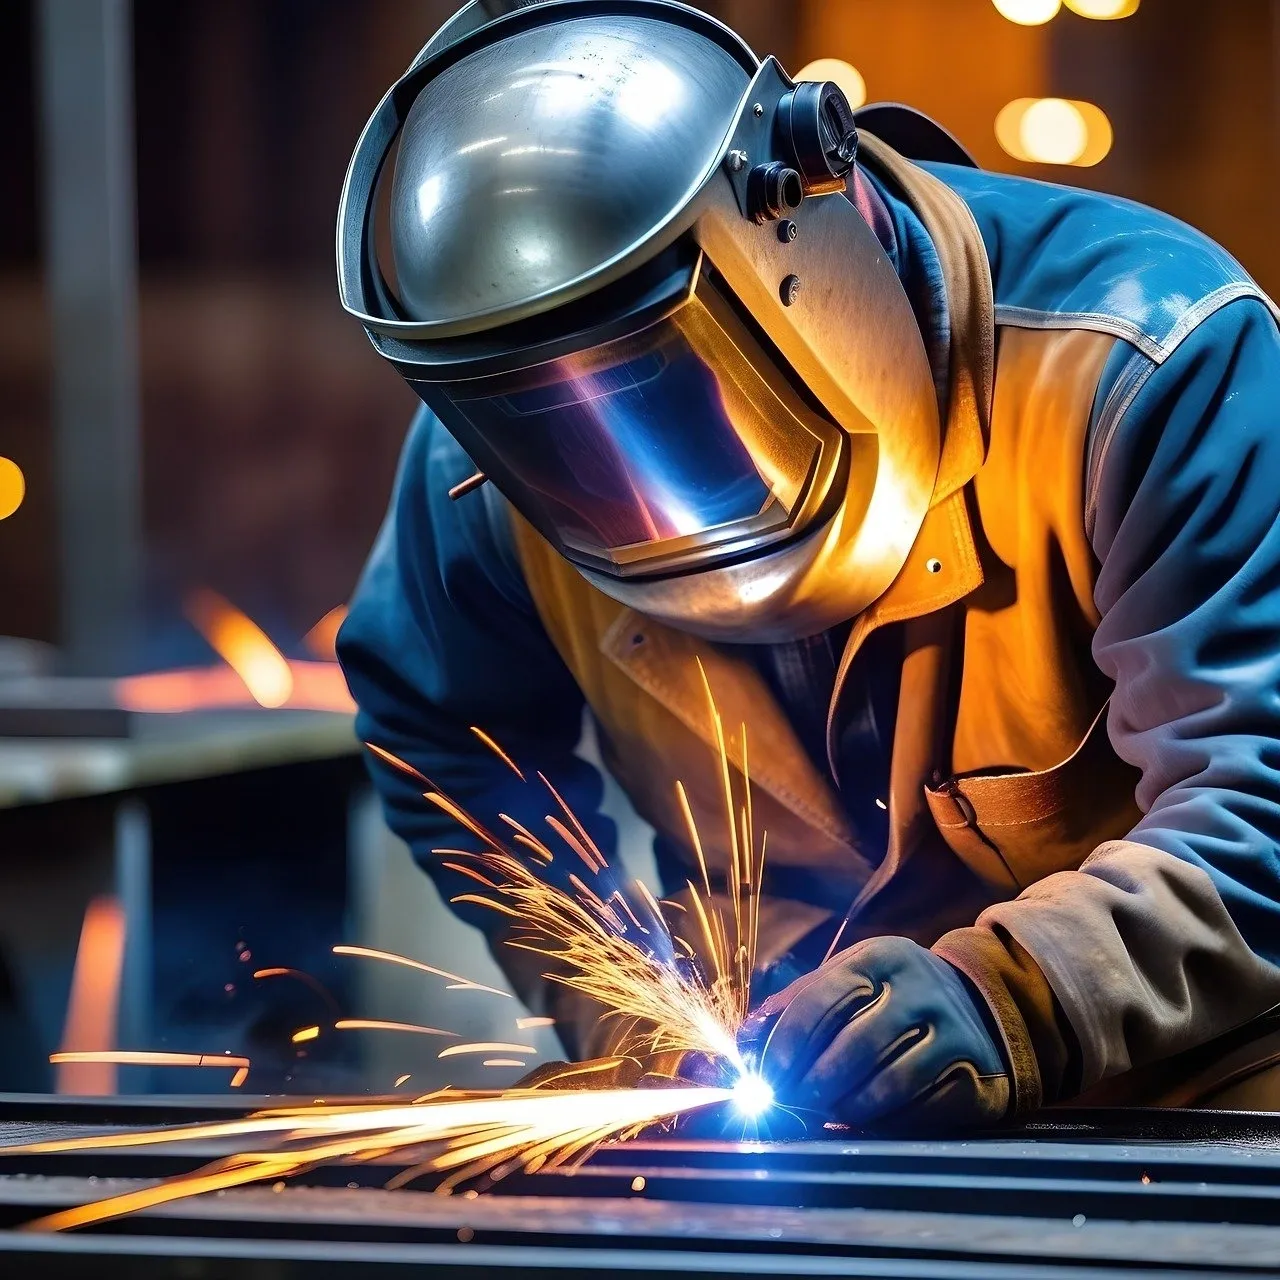 A man welding metal with an electric arc.